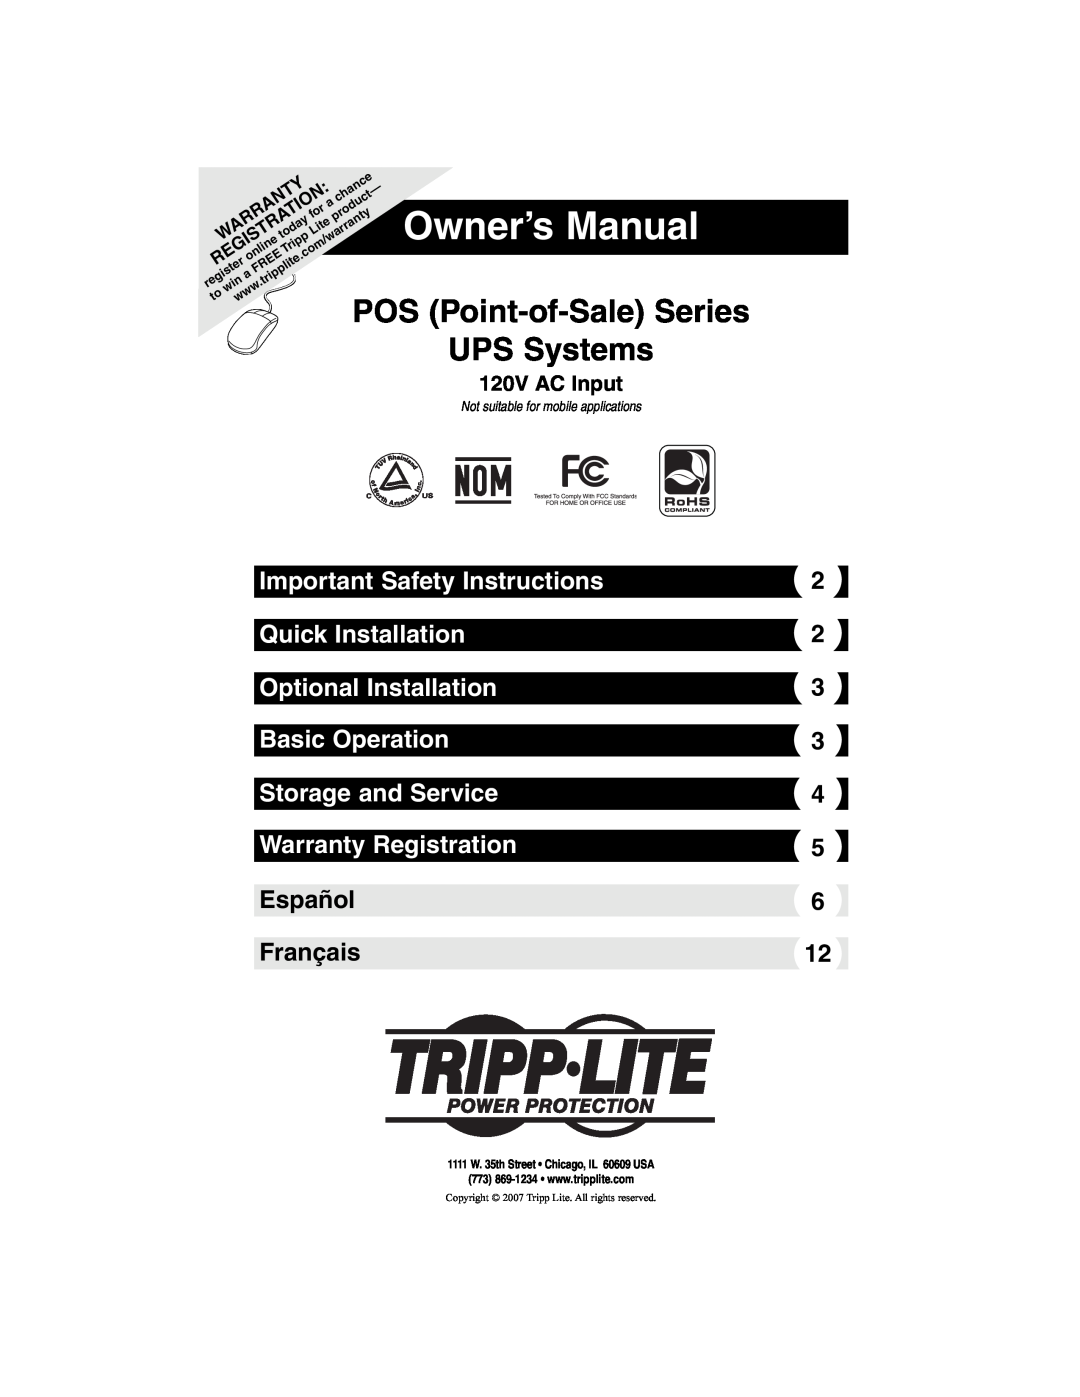 Tripp Lite POS Series owner manual Important Safety Instructions, Quick Installation, Optional Installation, Registration 